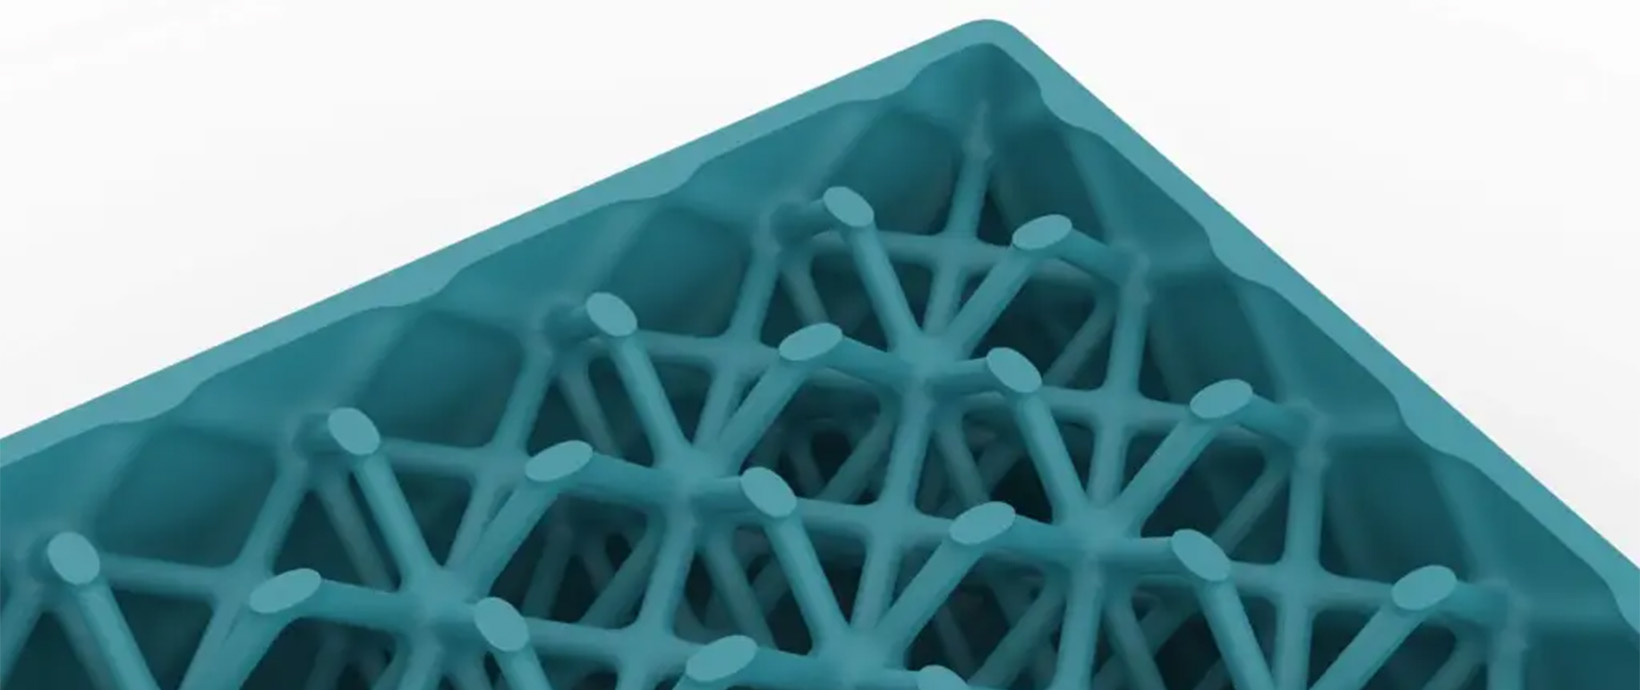 Types of Lattices for Additive Manufacturing – Terms Engineers Need to Know